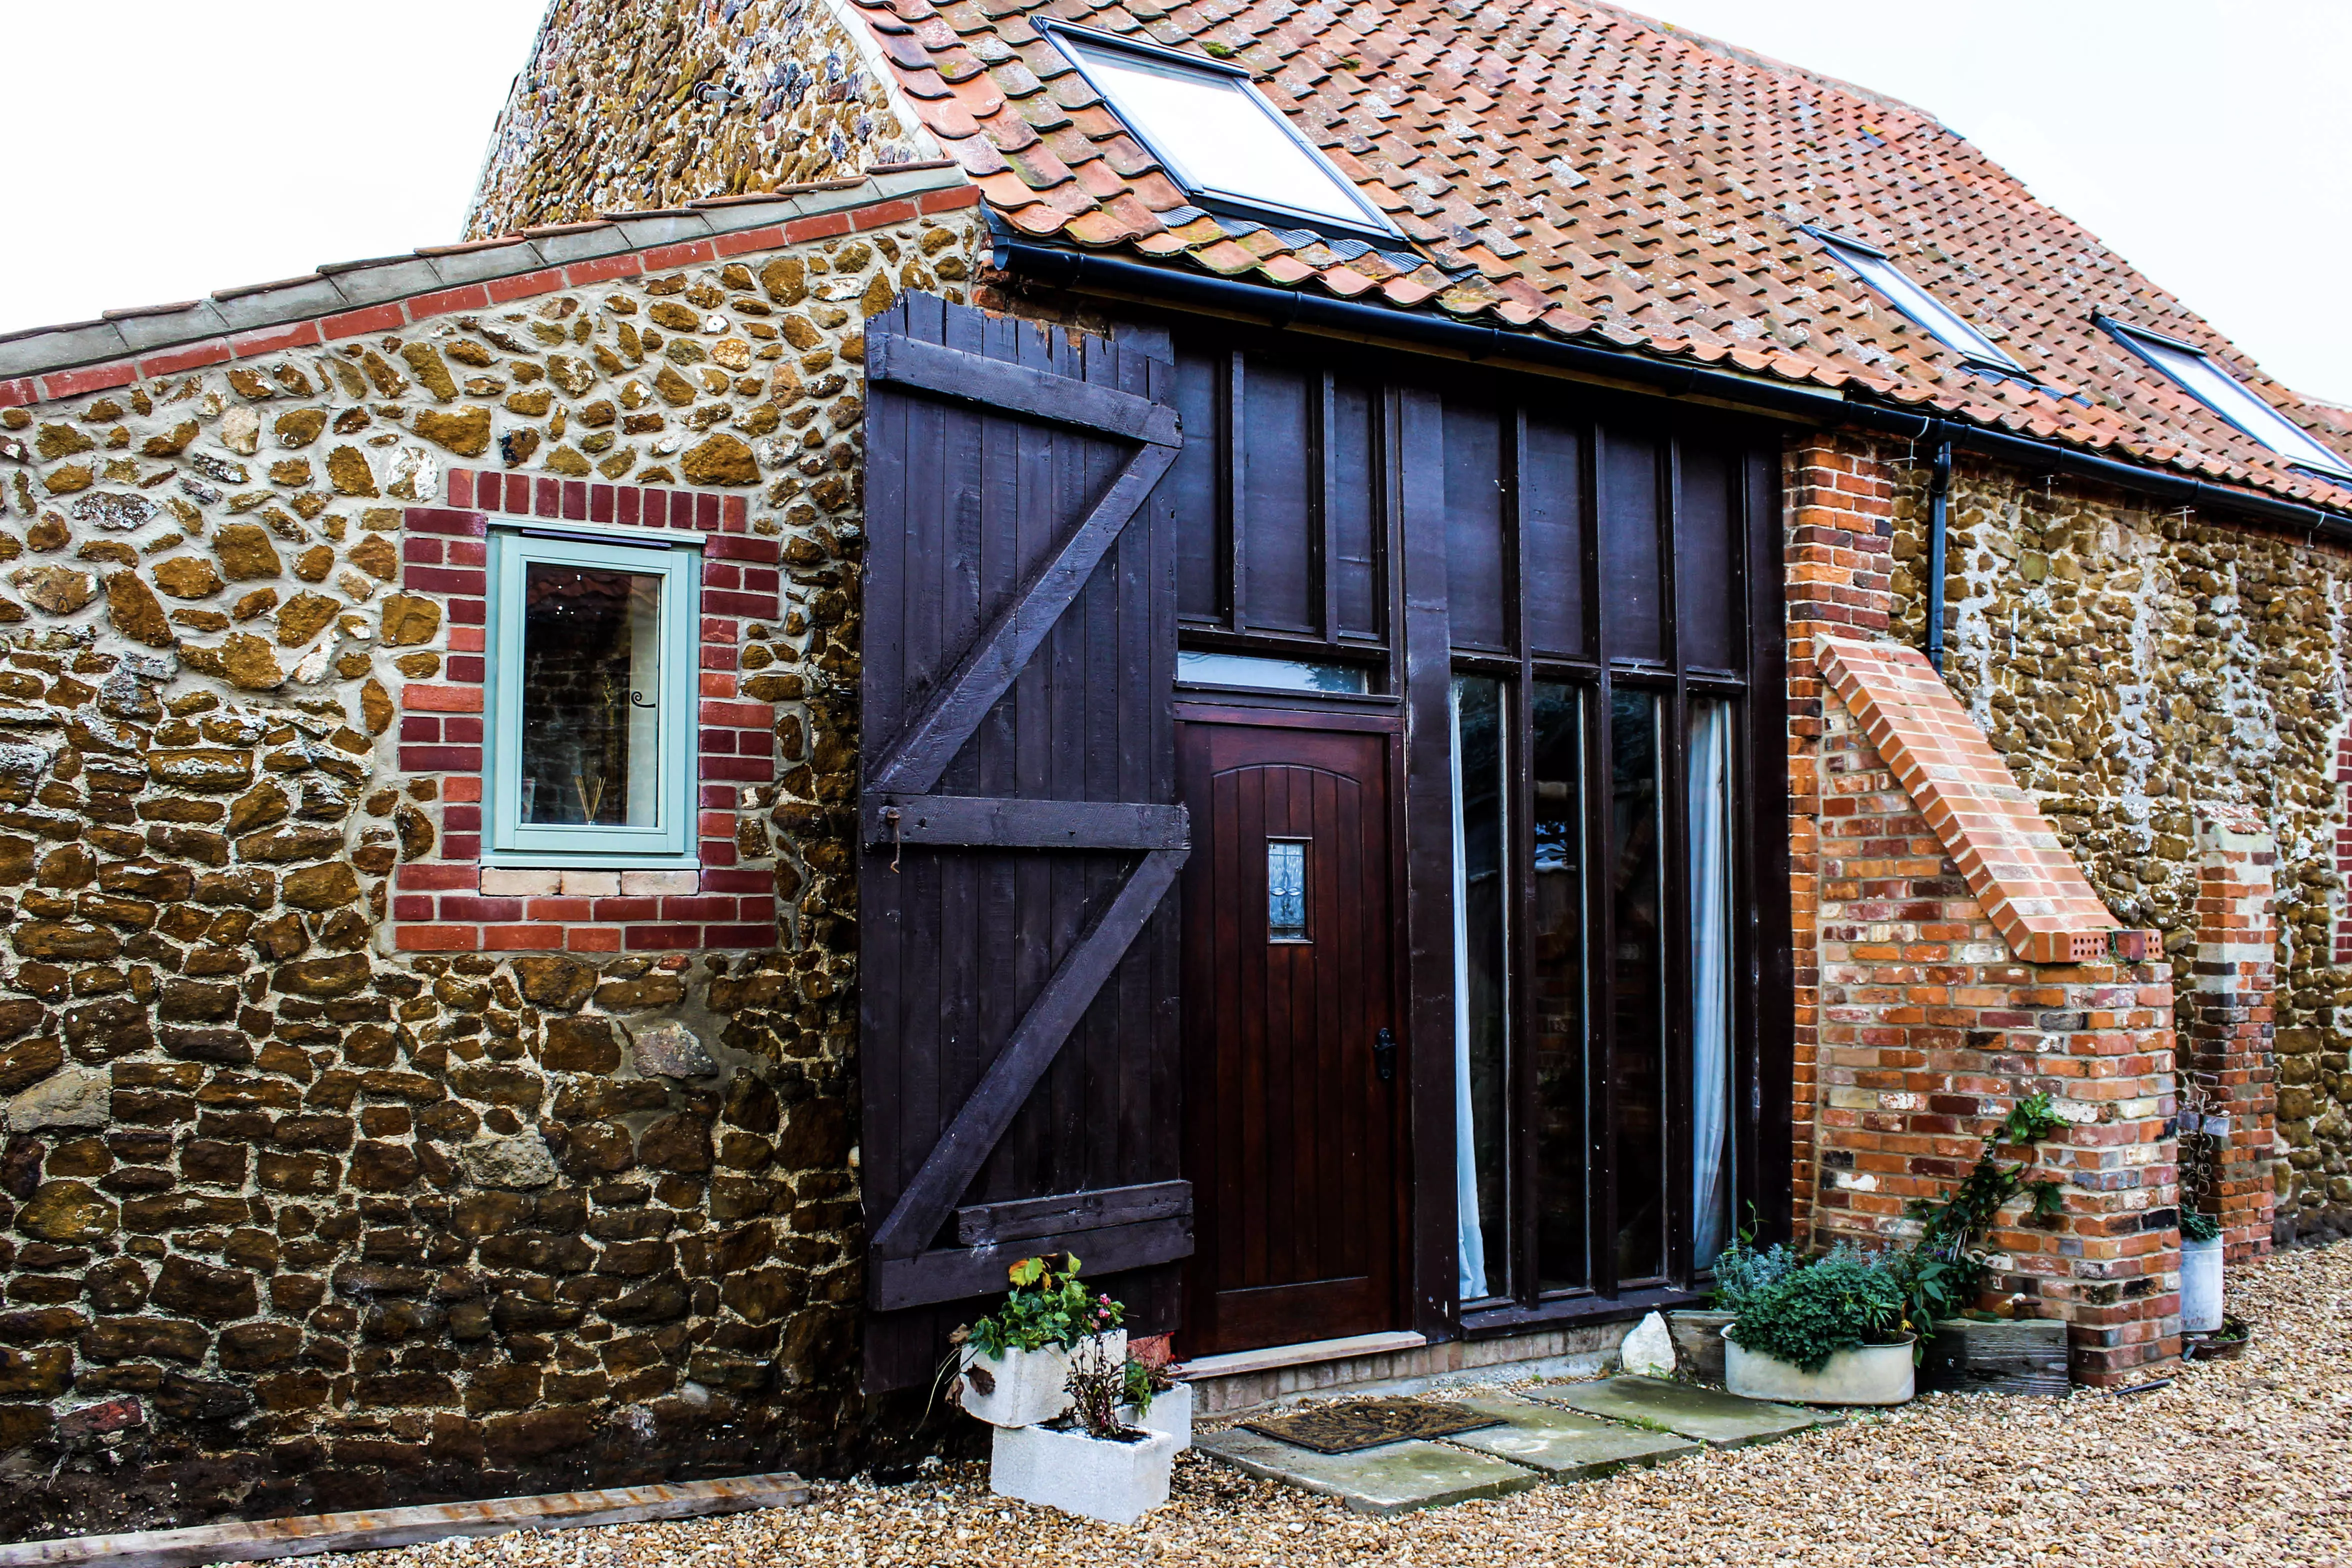 Old Barn Self Catering Cottage Holiday let - Hunstanton Holidays